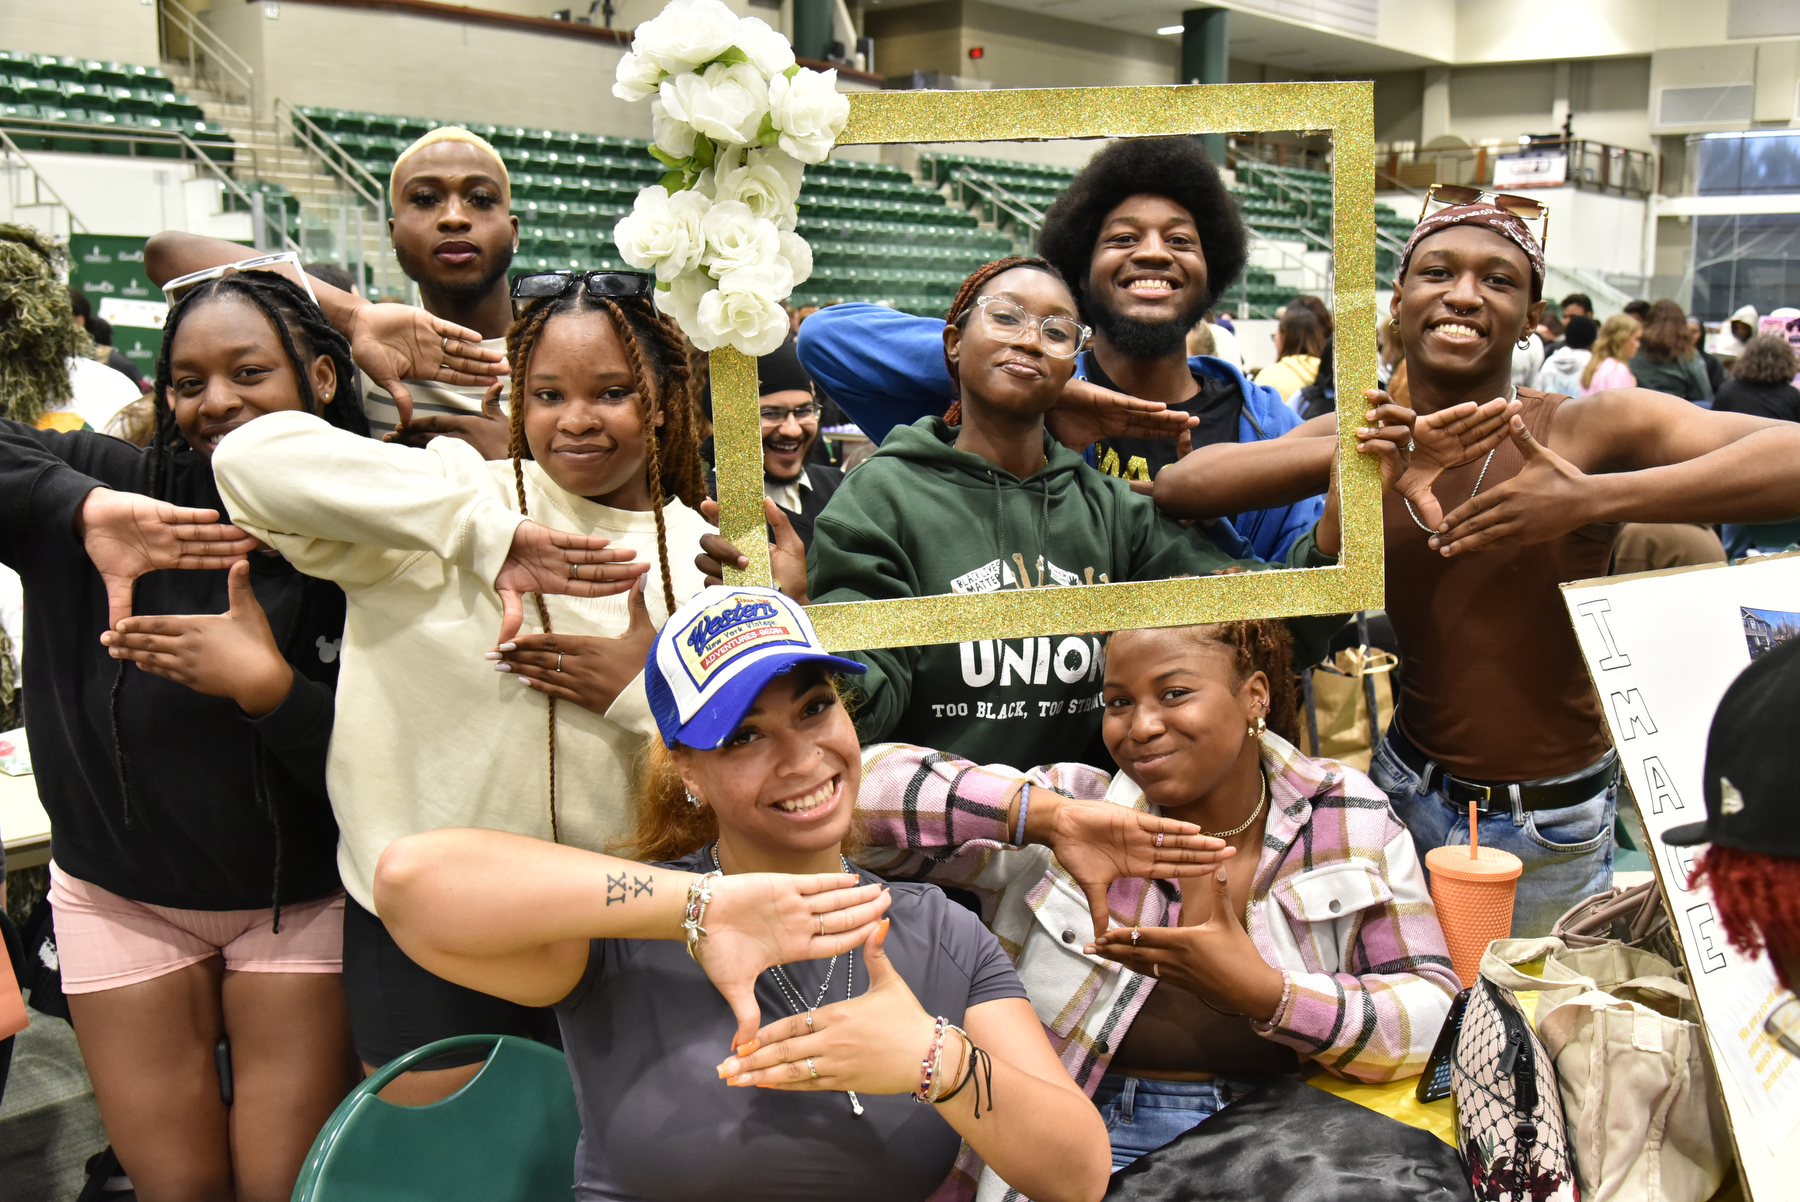 The many student organizations participating in the Student Involvement Fair included the Image Step Team, a beginner friendly organization that educates people through performances that step can be used as a form of self-expression.